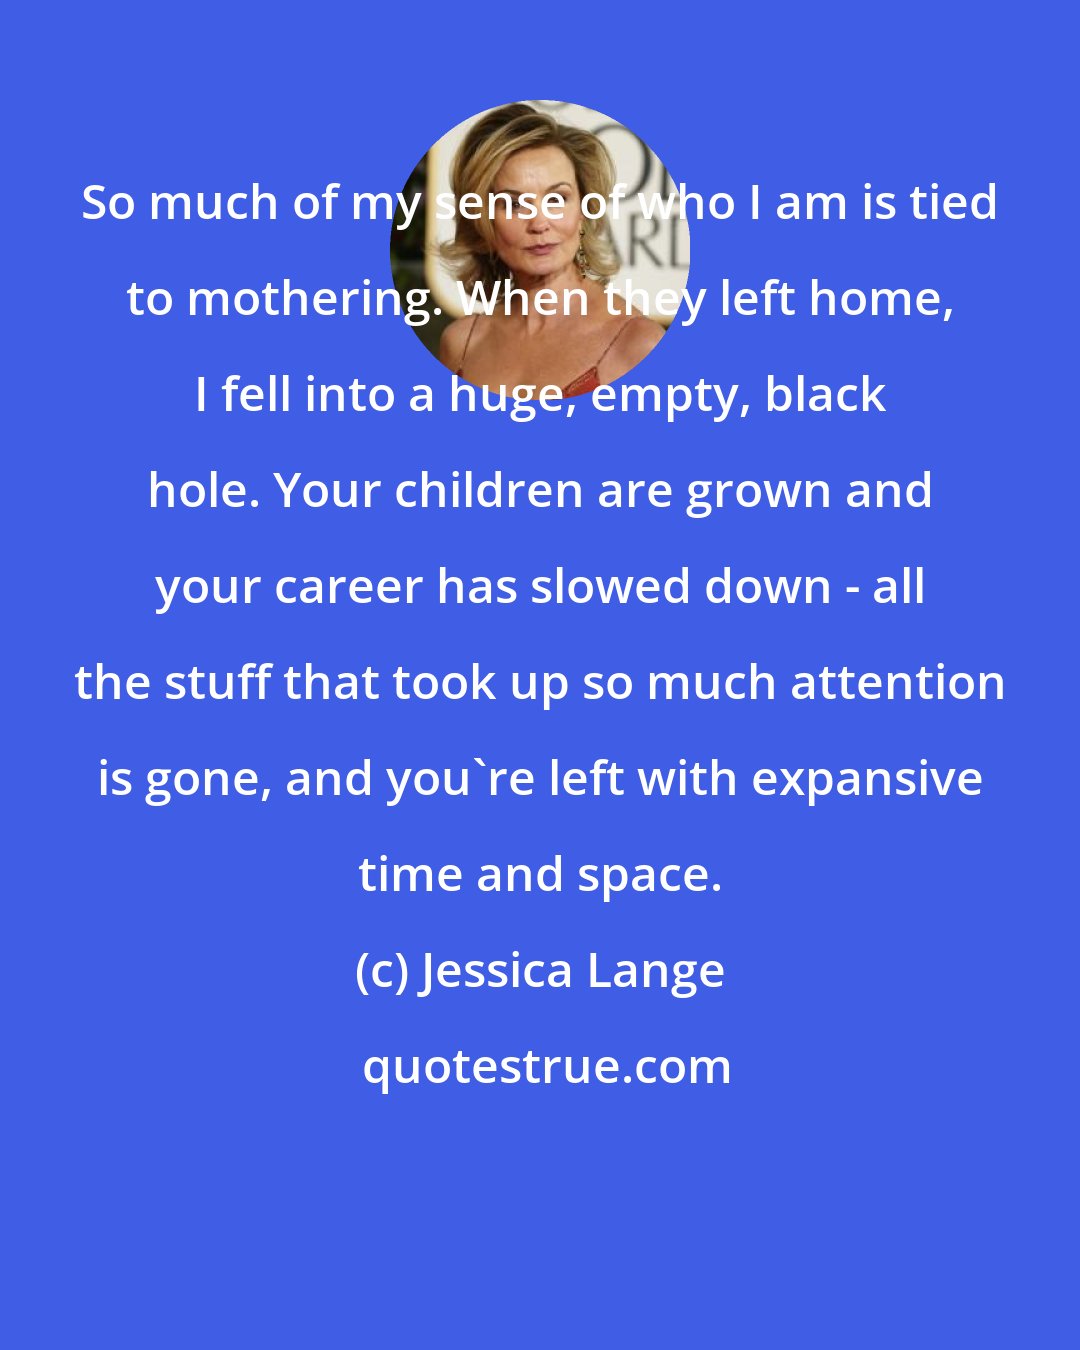 Jessica Lange: So much of my sense of who I am is tied to mothering. When they left home, I fell into a huge, empty, black hole. Your children are grown and your career has slowed down - all the stuff that took up so much attention is gone, and you're left with expansive time and space.